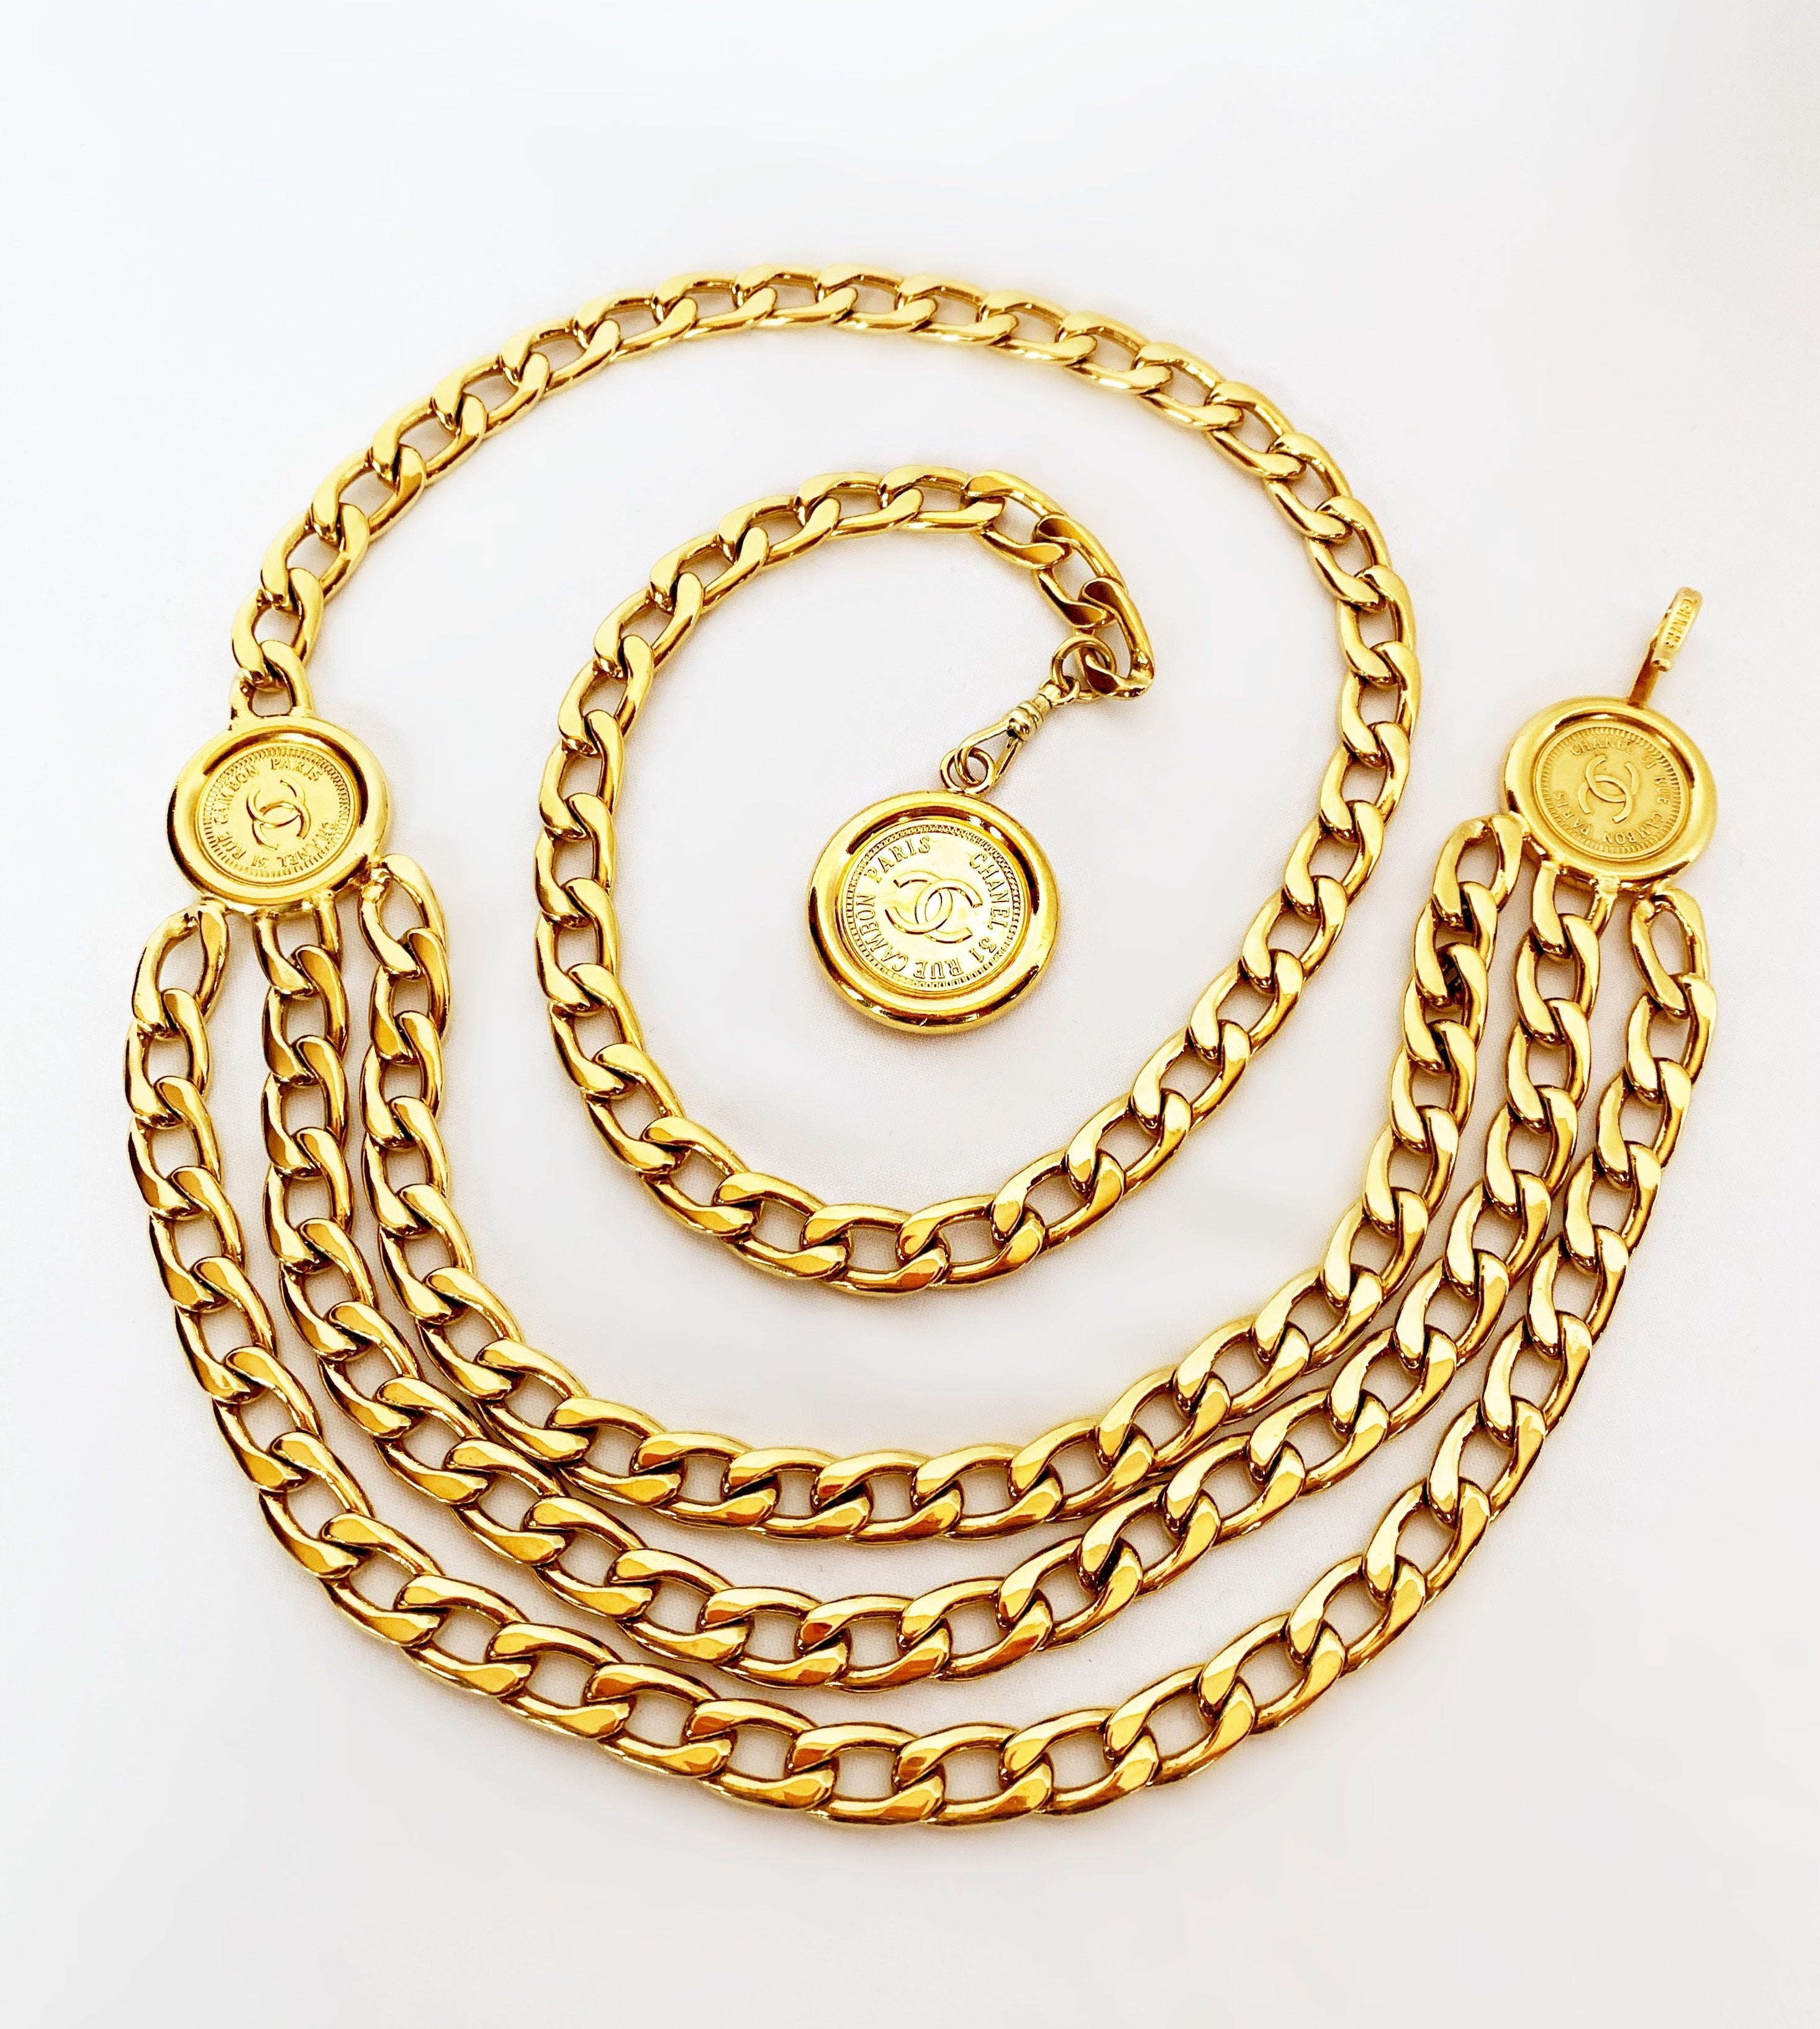 CHANEL 3 LAYERED BELT NECKLACE WITH 3 MEDALLION COINS – The Paris